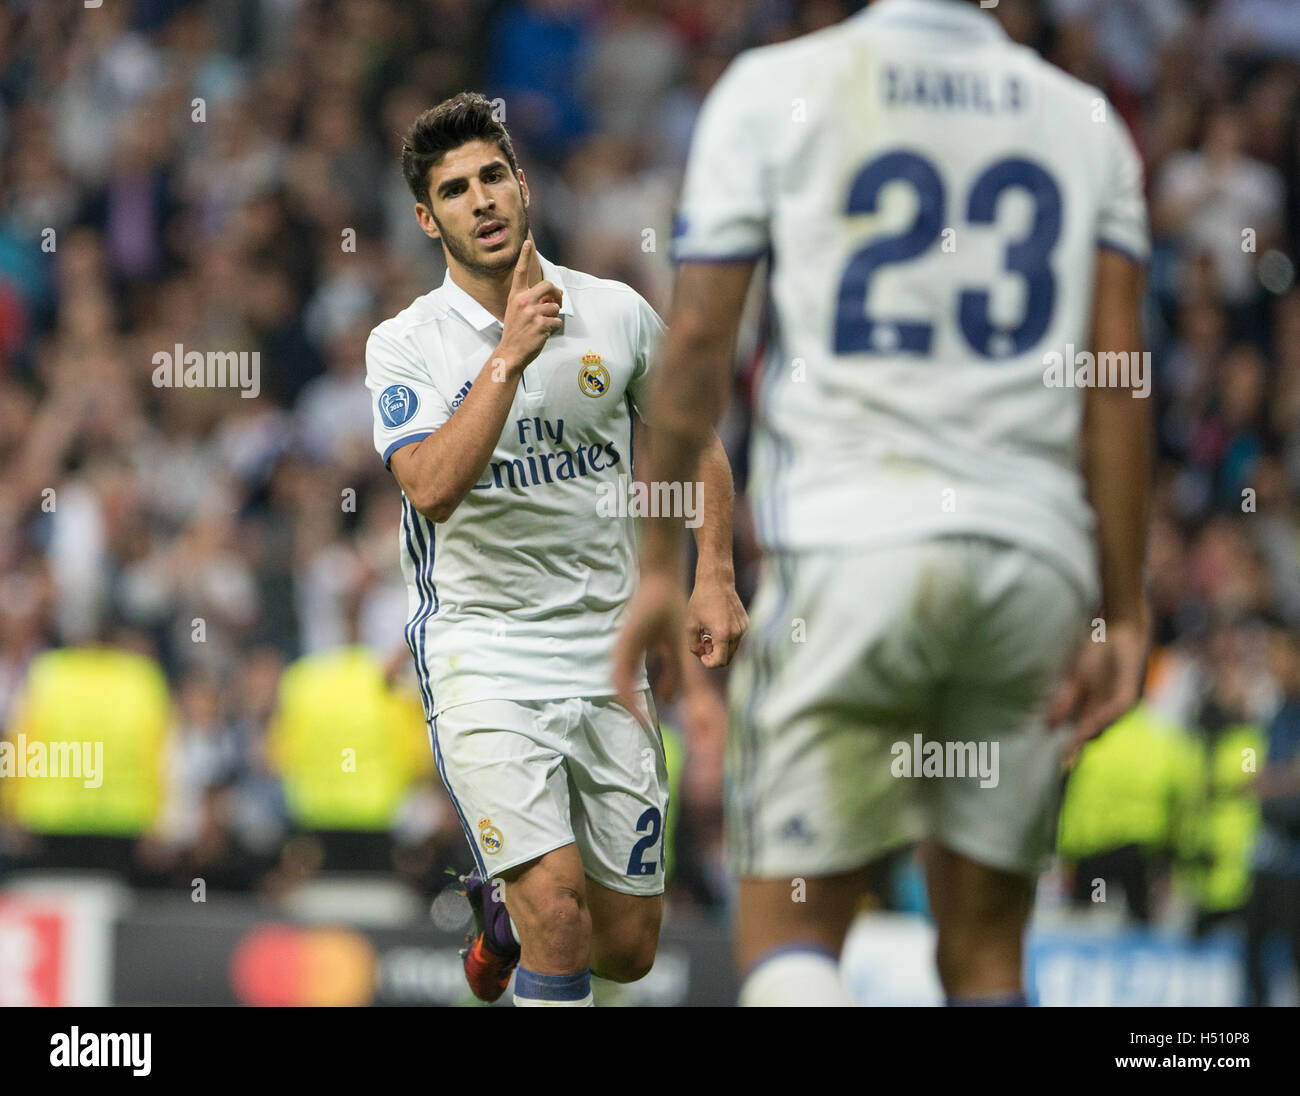 Madrid, Spain. 18th October, 2016. Real Madrid's Spanish midfielder Marco Asensio celebrating after scoring during the UEFA Champions League match between Real Madrid and Legia Warszawa at the Santiago Bernabeu Stadium in Madrid, Tuesday, October 18, 2016. Credit:  VWPics/Alamy Live News Stock Photo